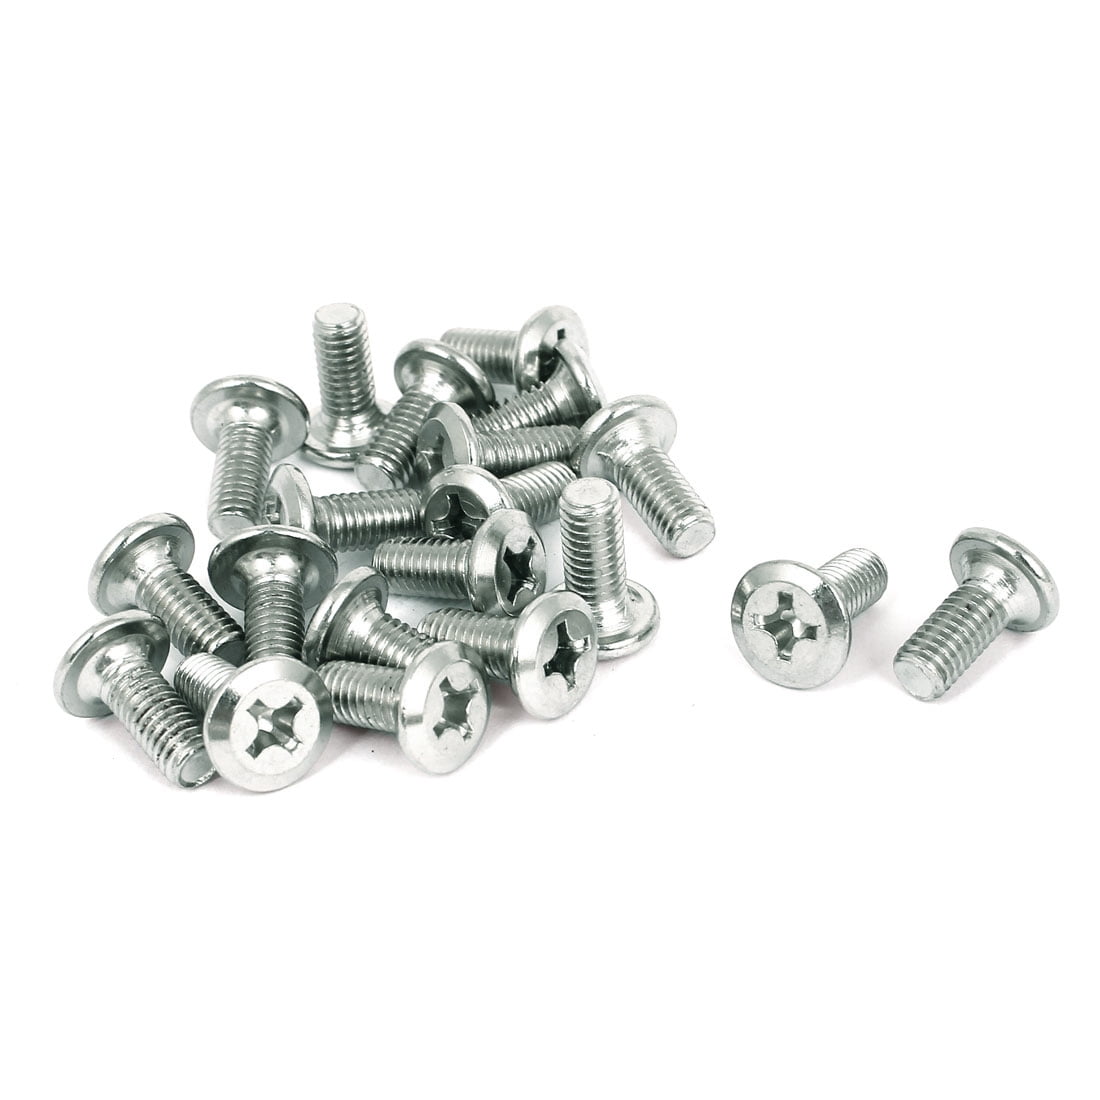 Machine screws with nuts M5 x 30 countersunk slot bolt bolts screw pack of 20 